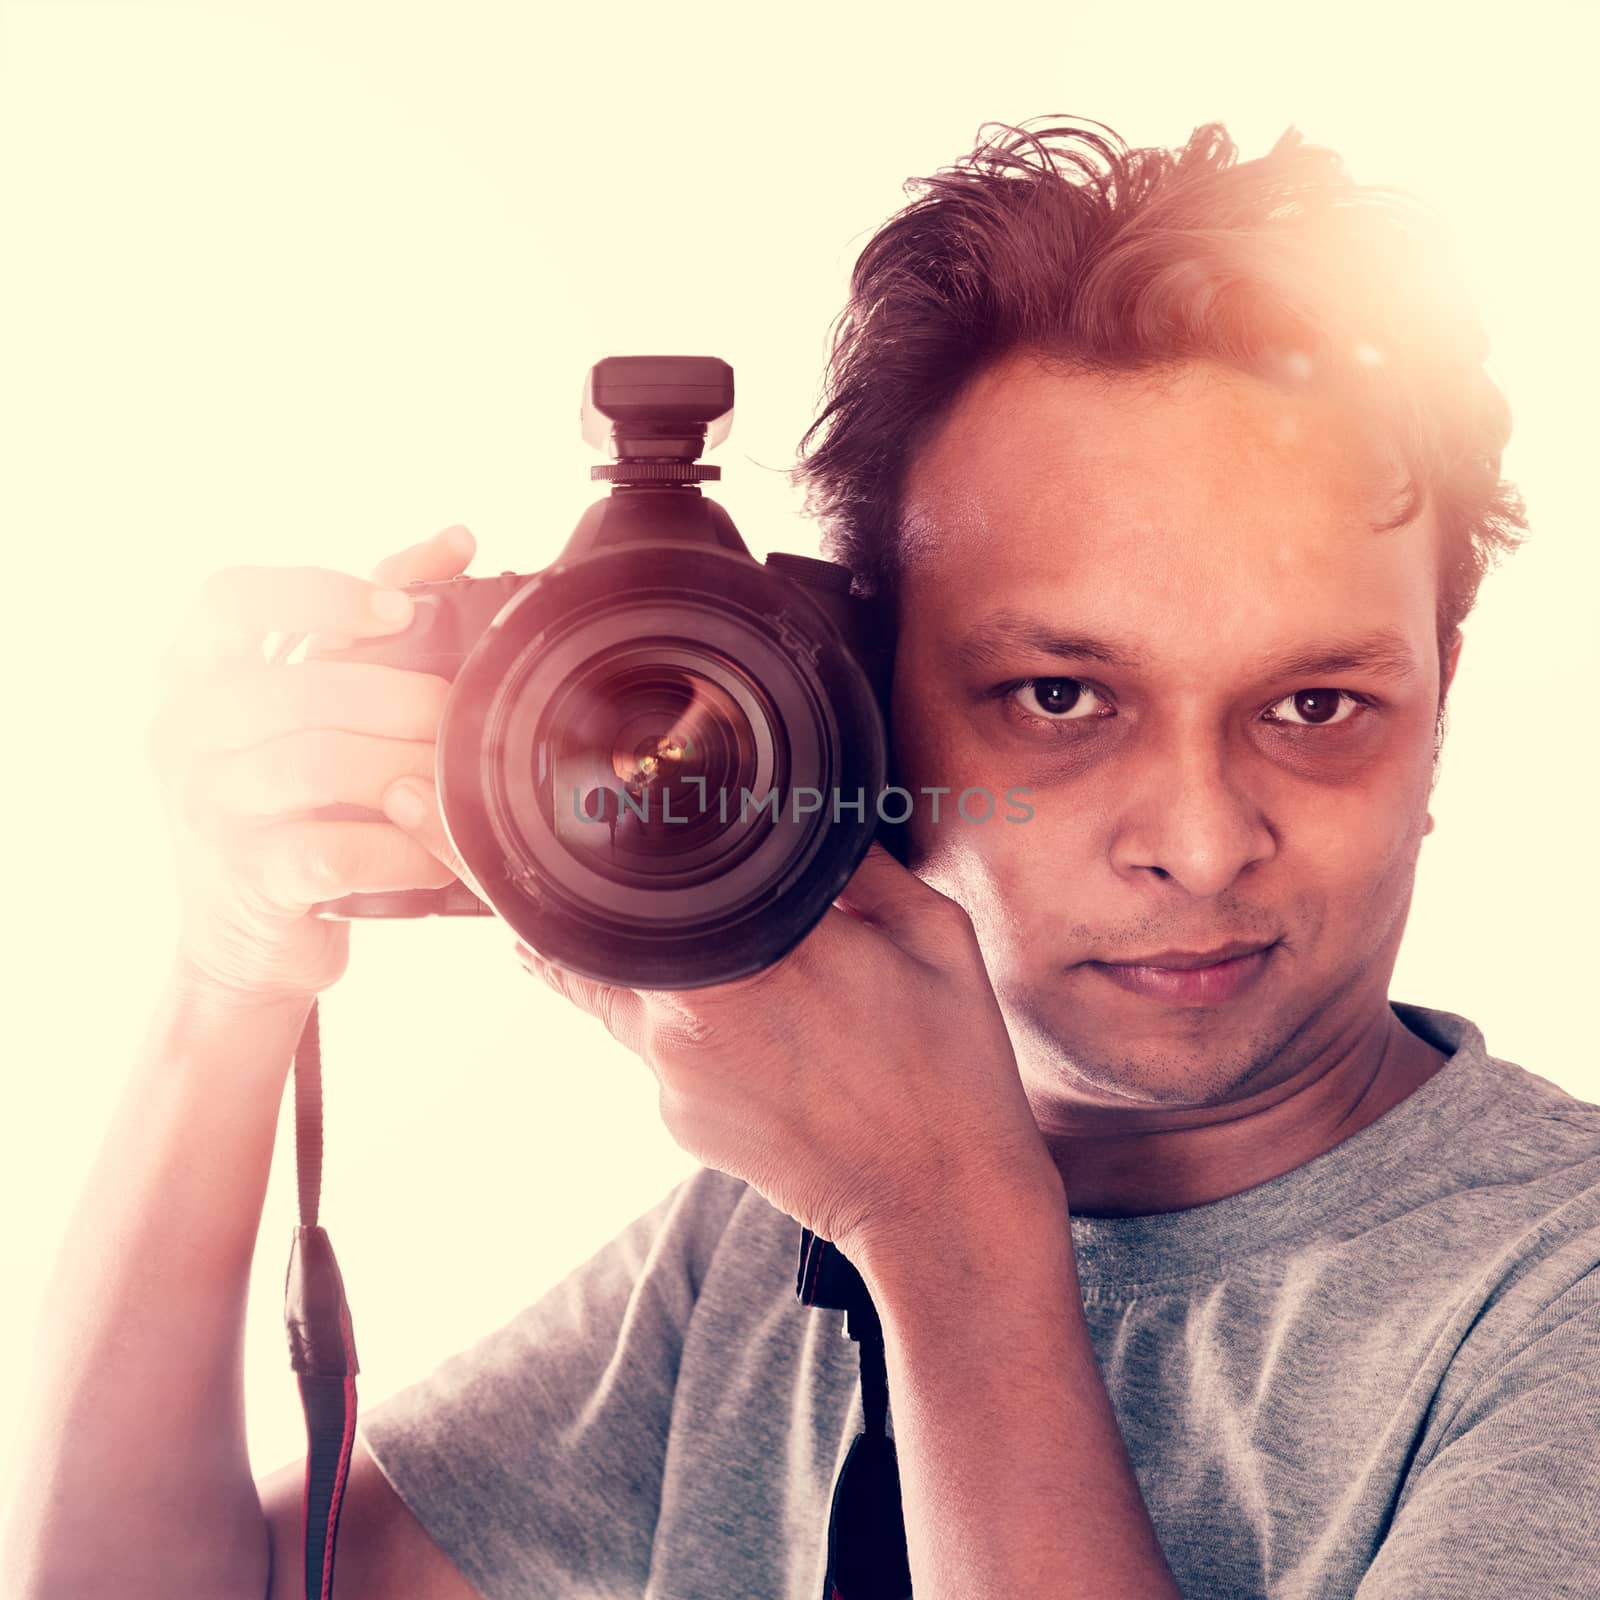 Creative Indian Photographer taking photo with camera